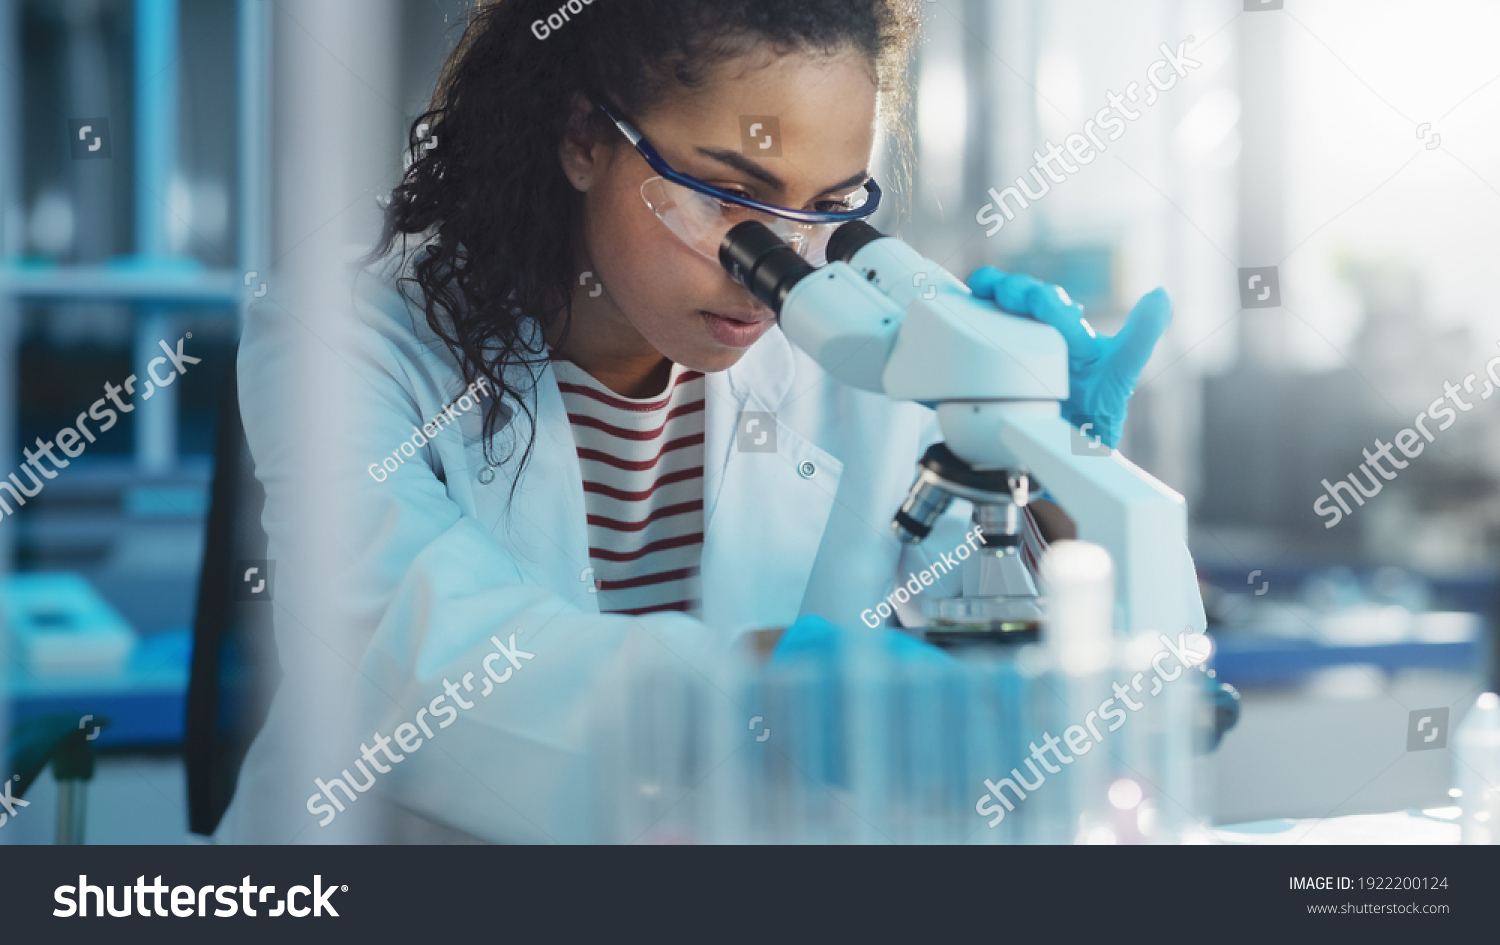 Medical Science Laboratory: Portrait of Beautiful Black Scientist Looking Under Microscope Does Analysis of Test Sample. Ambitious Young Biotechnology Specialist, working with Advanced Equipment #1922200124